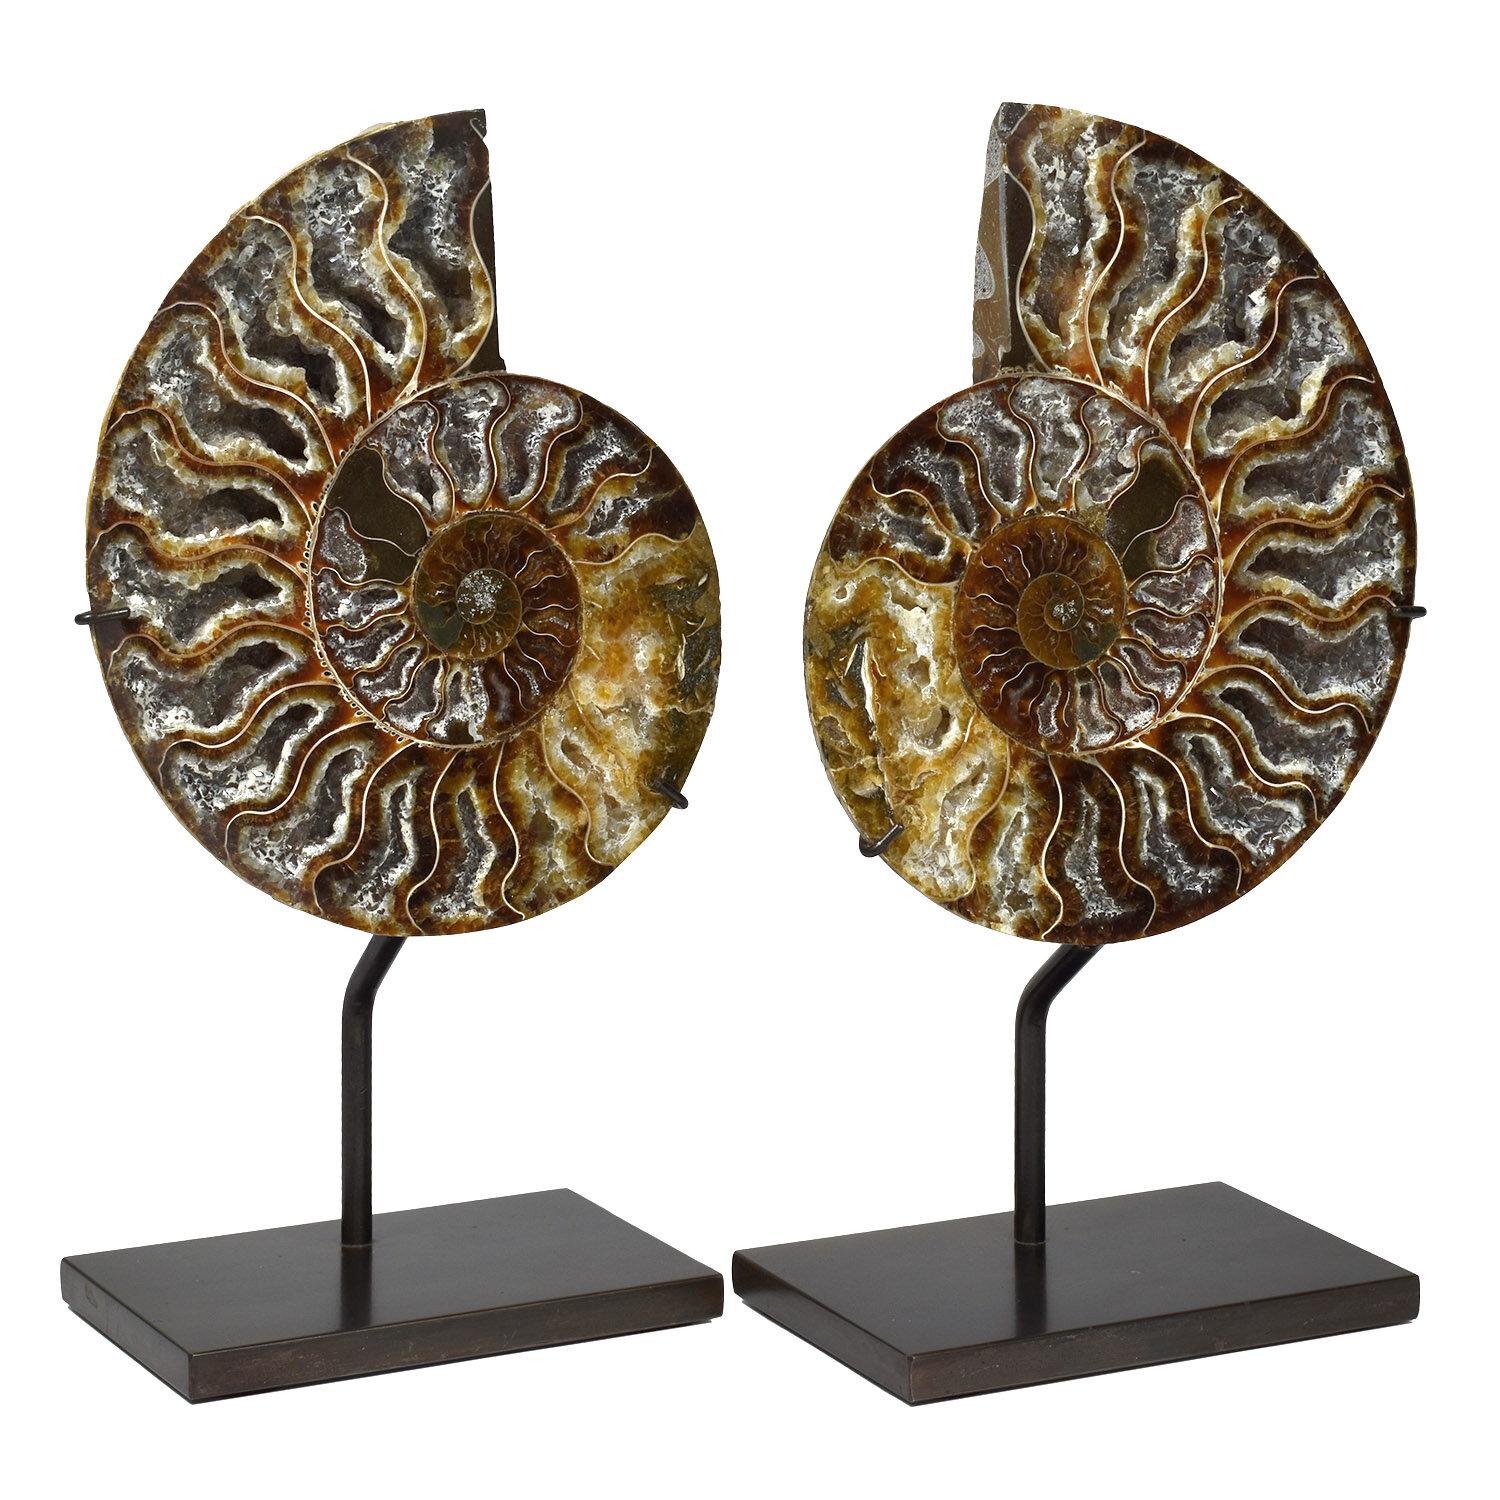 An excellent quality split ammonite fossil.  We hand pick each set, looking for minimal grey matrix filled chambers.  The more chambers that are filled with crystals, to our minds, are the better quality specimens. 

Ammonites were cephalopods that